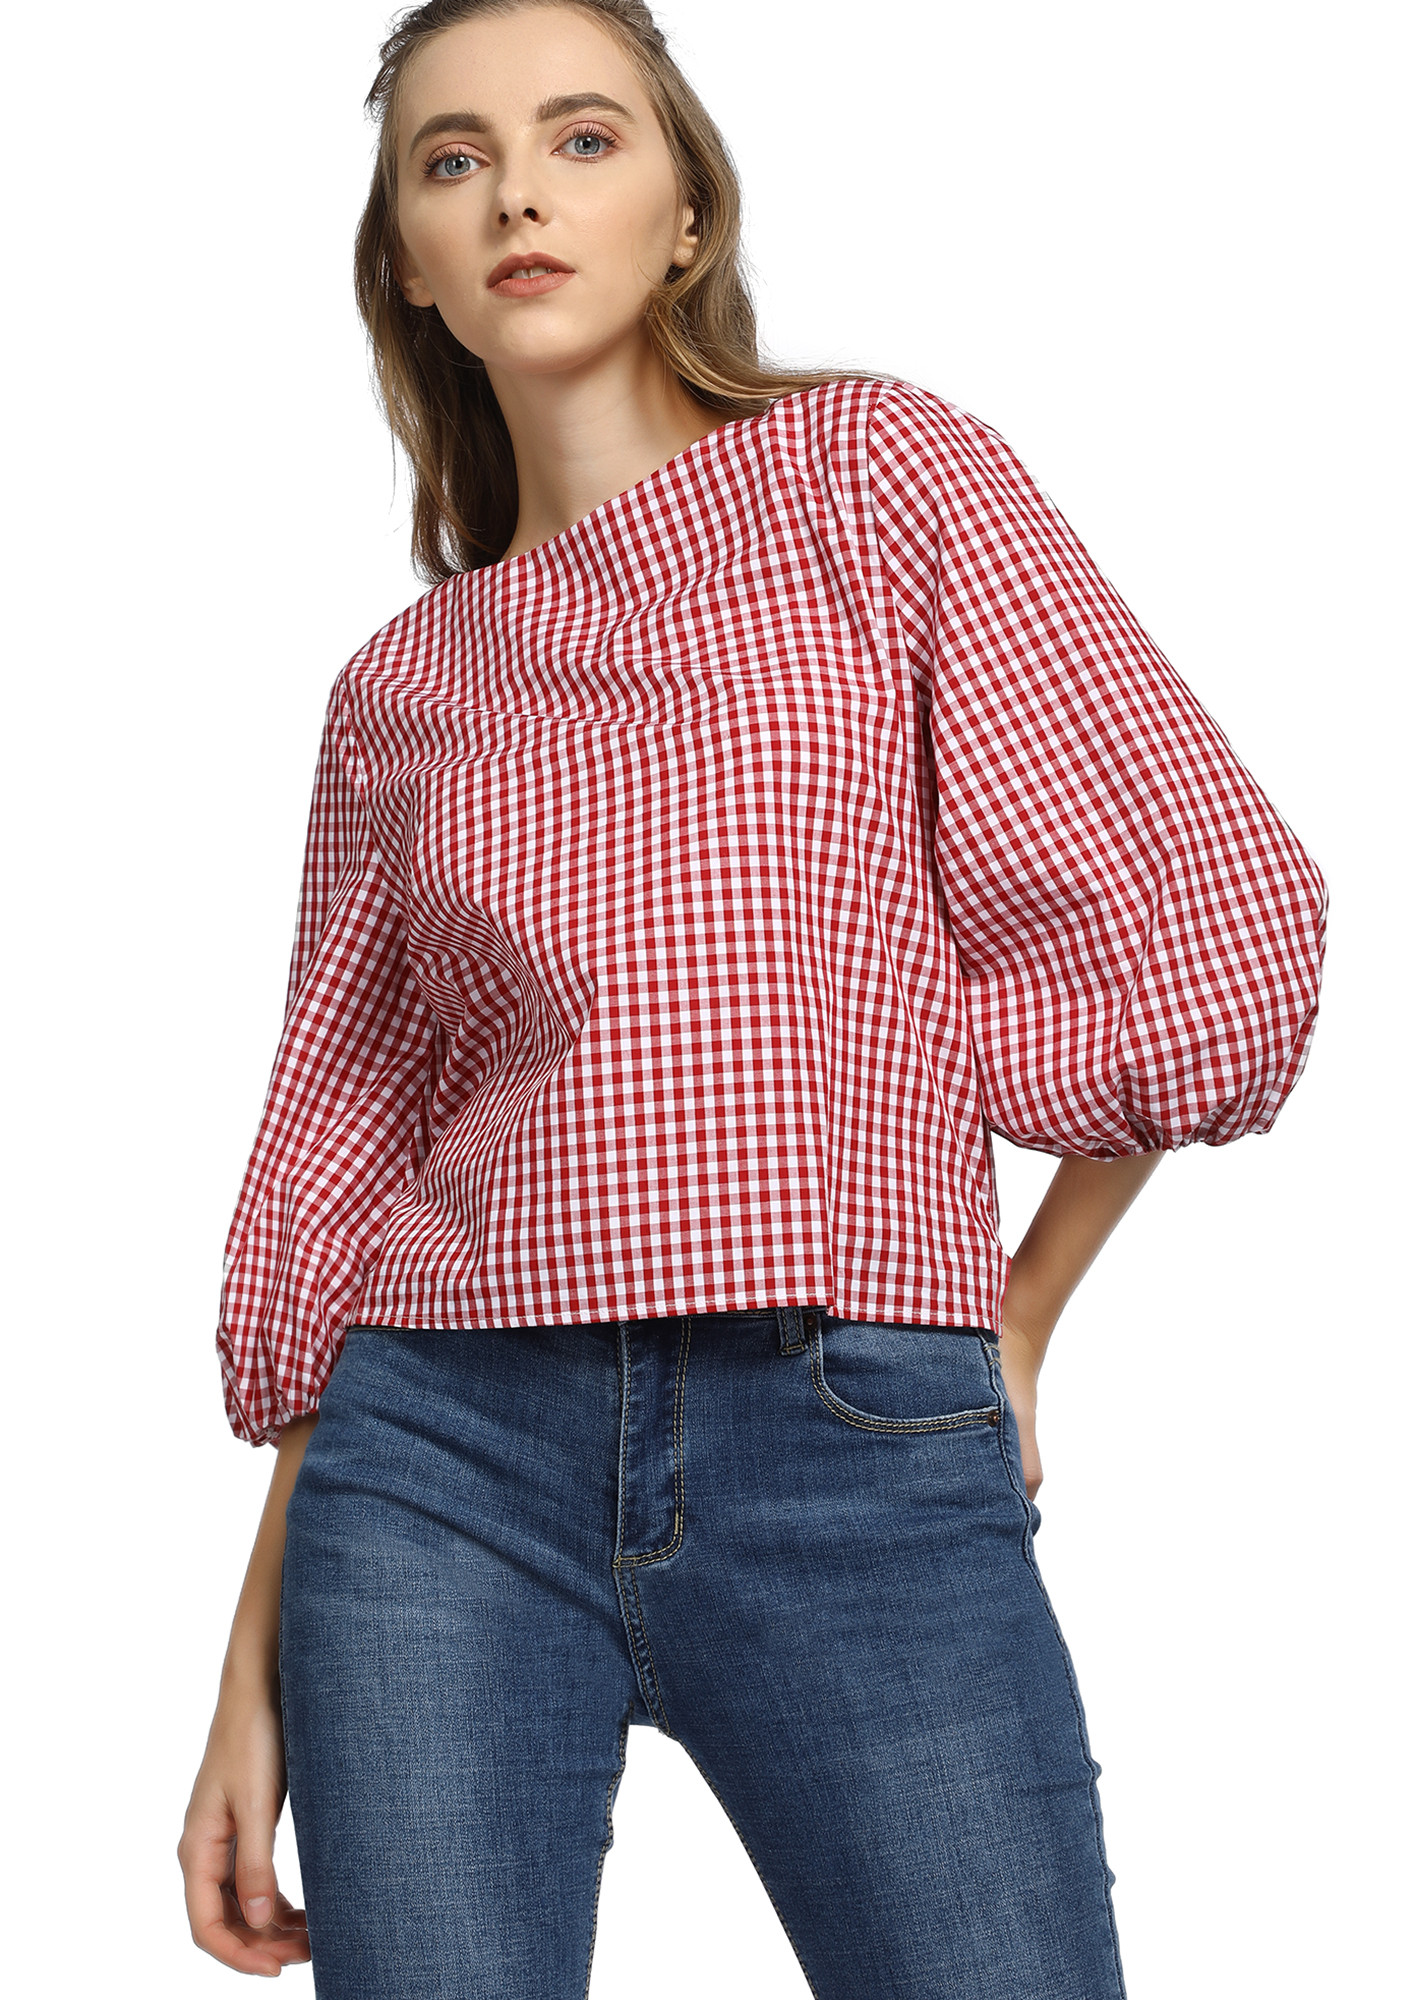 CHIC FOR THE SEASON RED STRIPED TOP